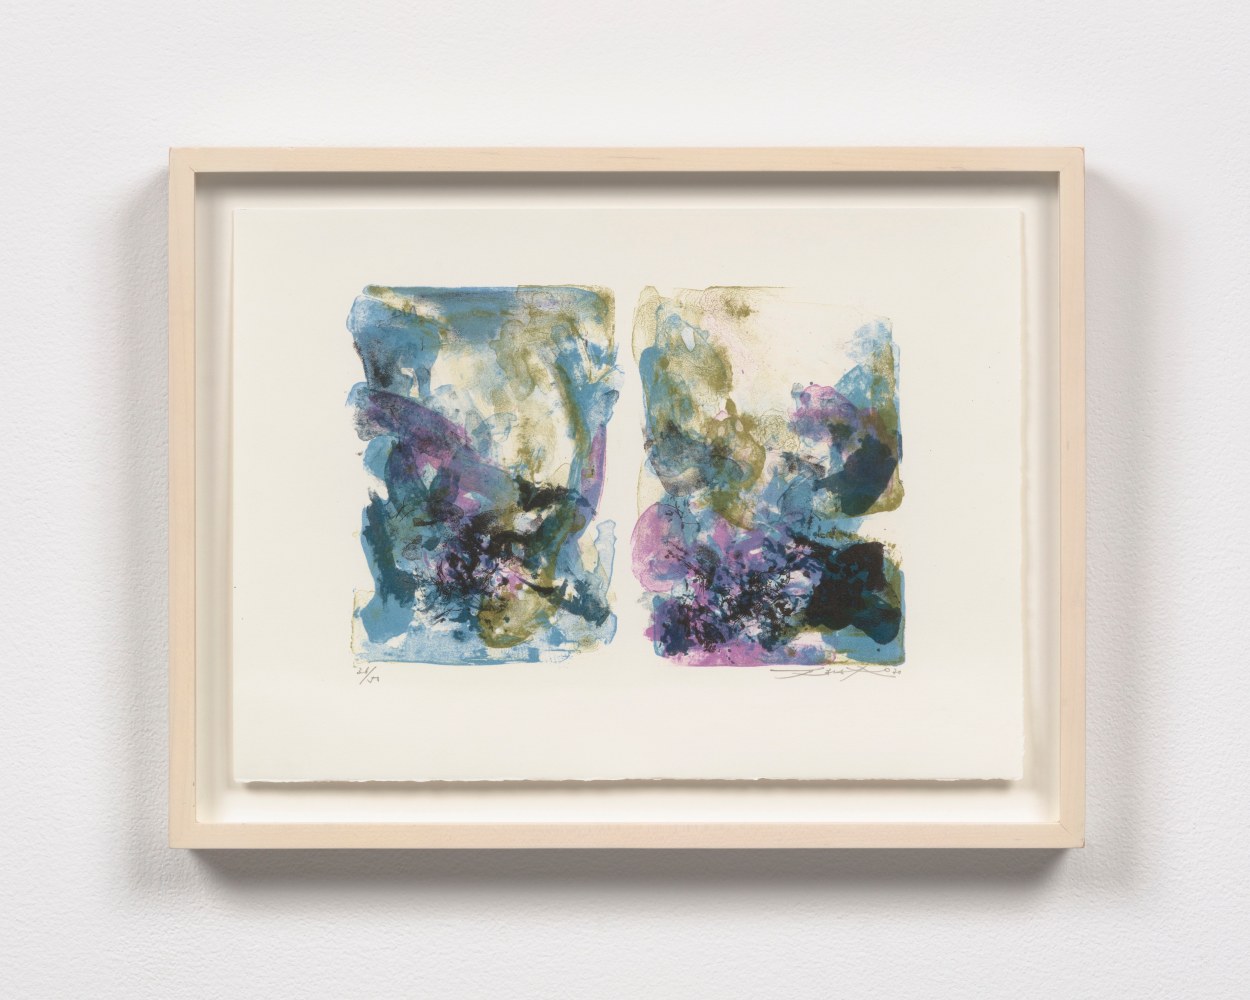 A blue, green, and lavender horizontal lithograph with two vertical compositions on a white background